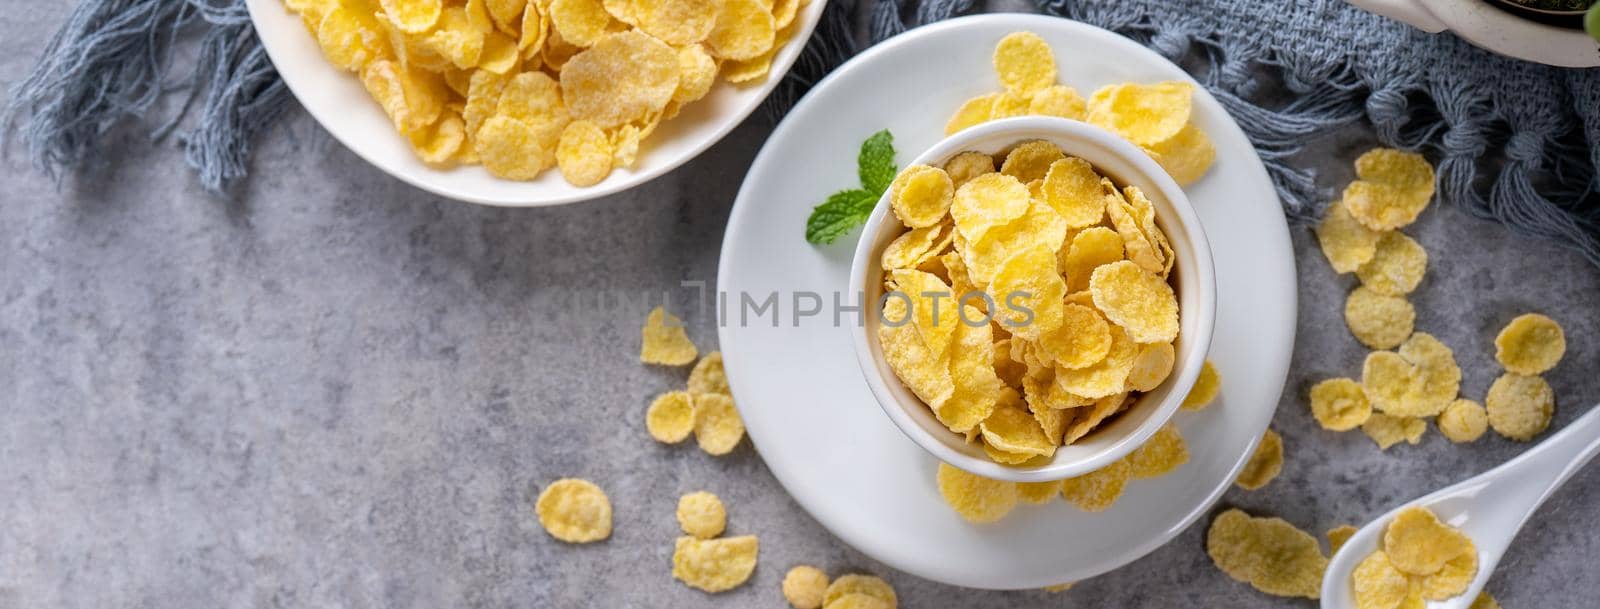 Corn flakes bowl sweets on gray cement background, top view flat lay layout design, fresh and healthy breakbast concept.